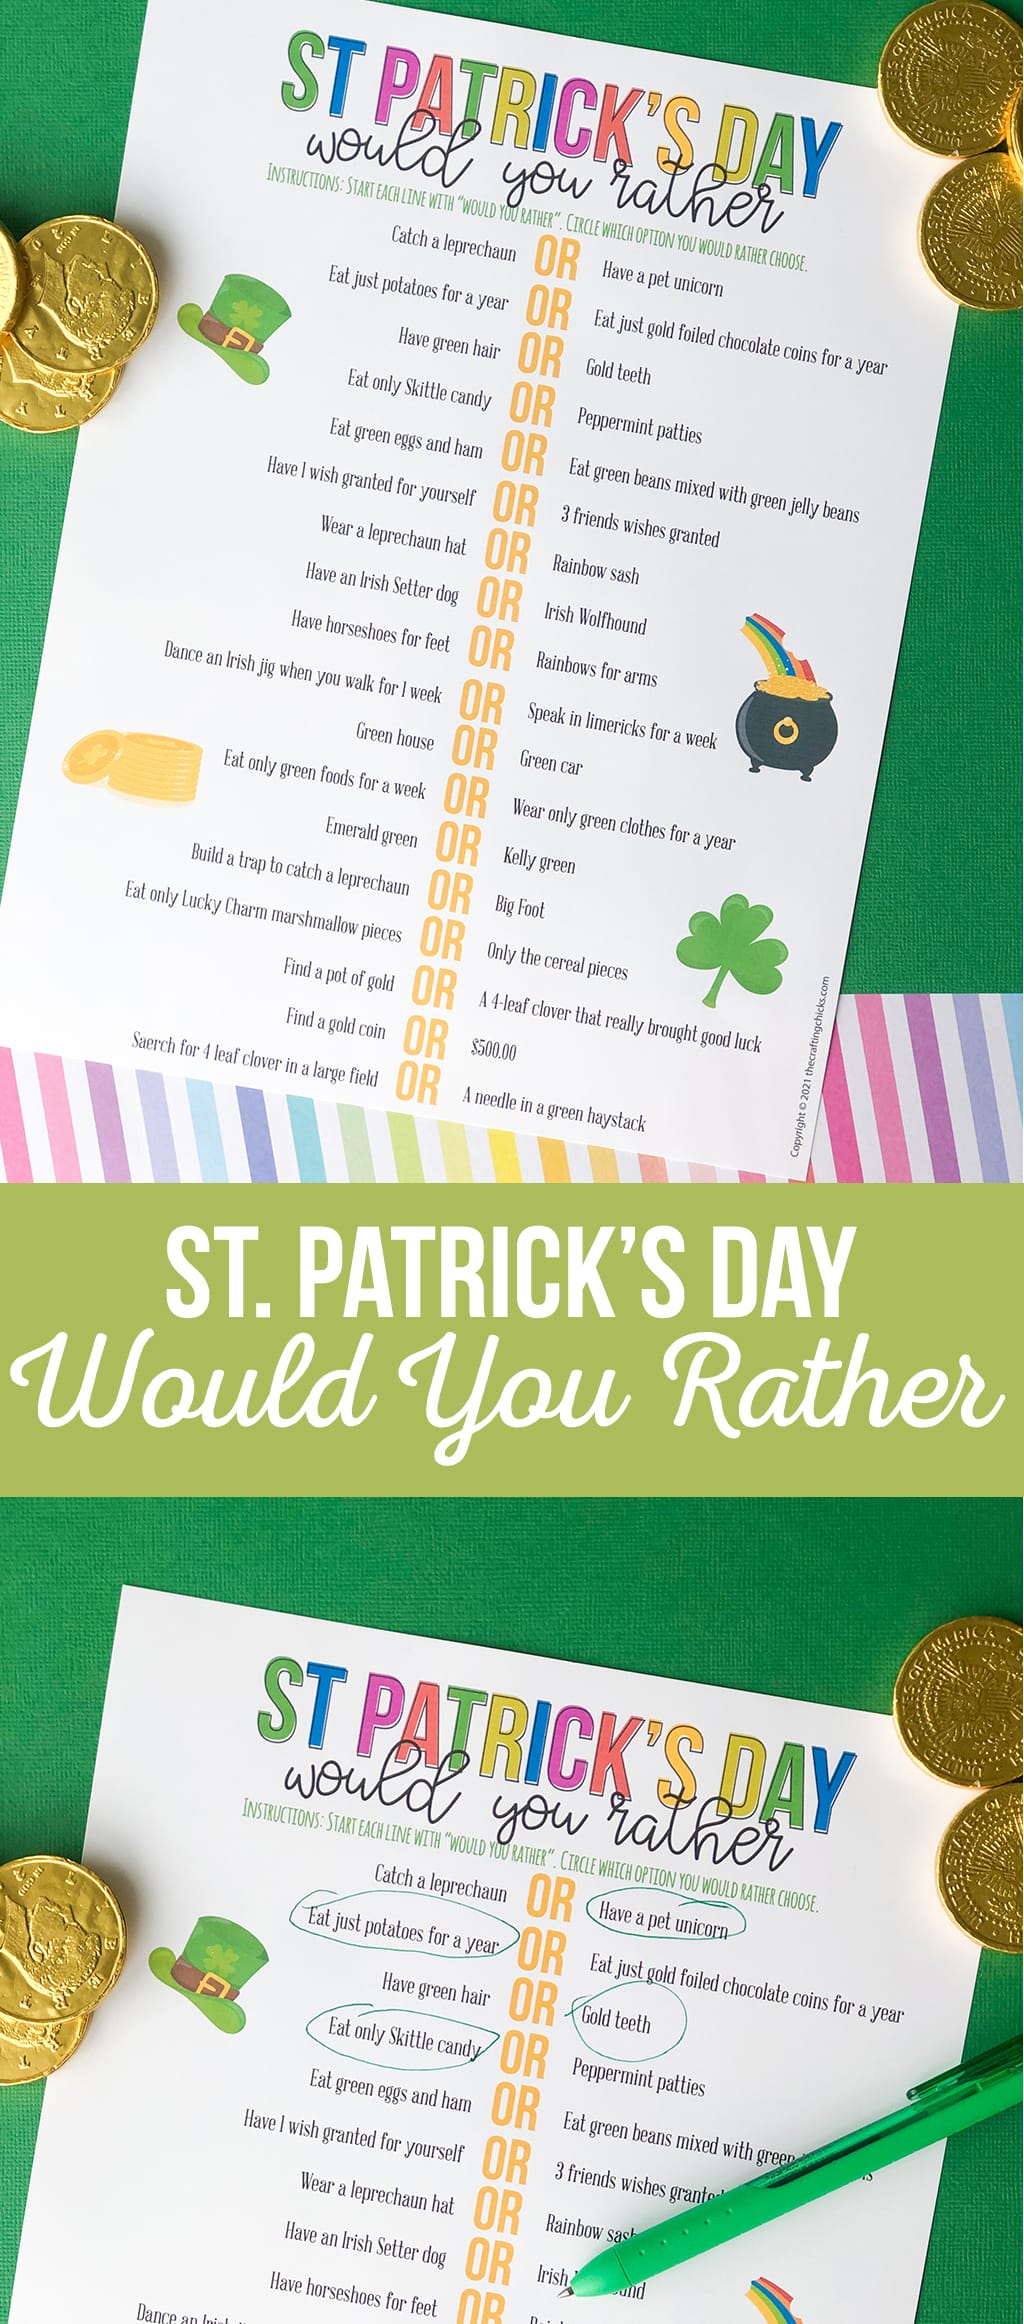 St. Patrick's Day Would You Rather printable on a green and rainbow background